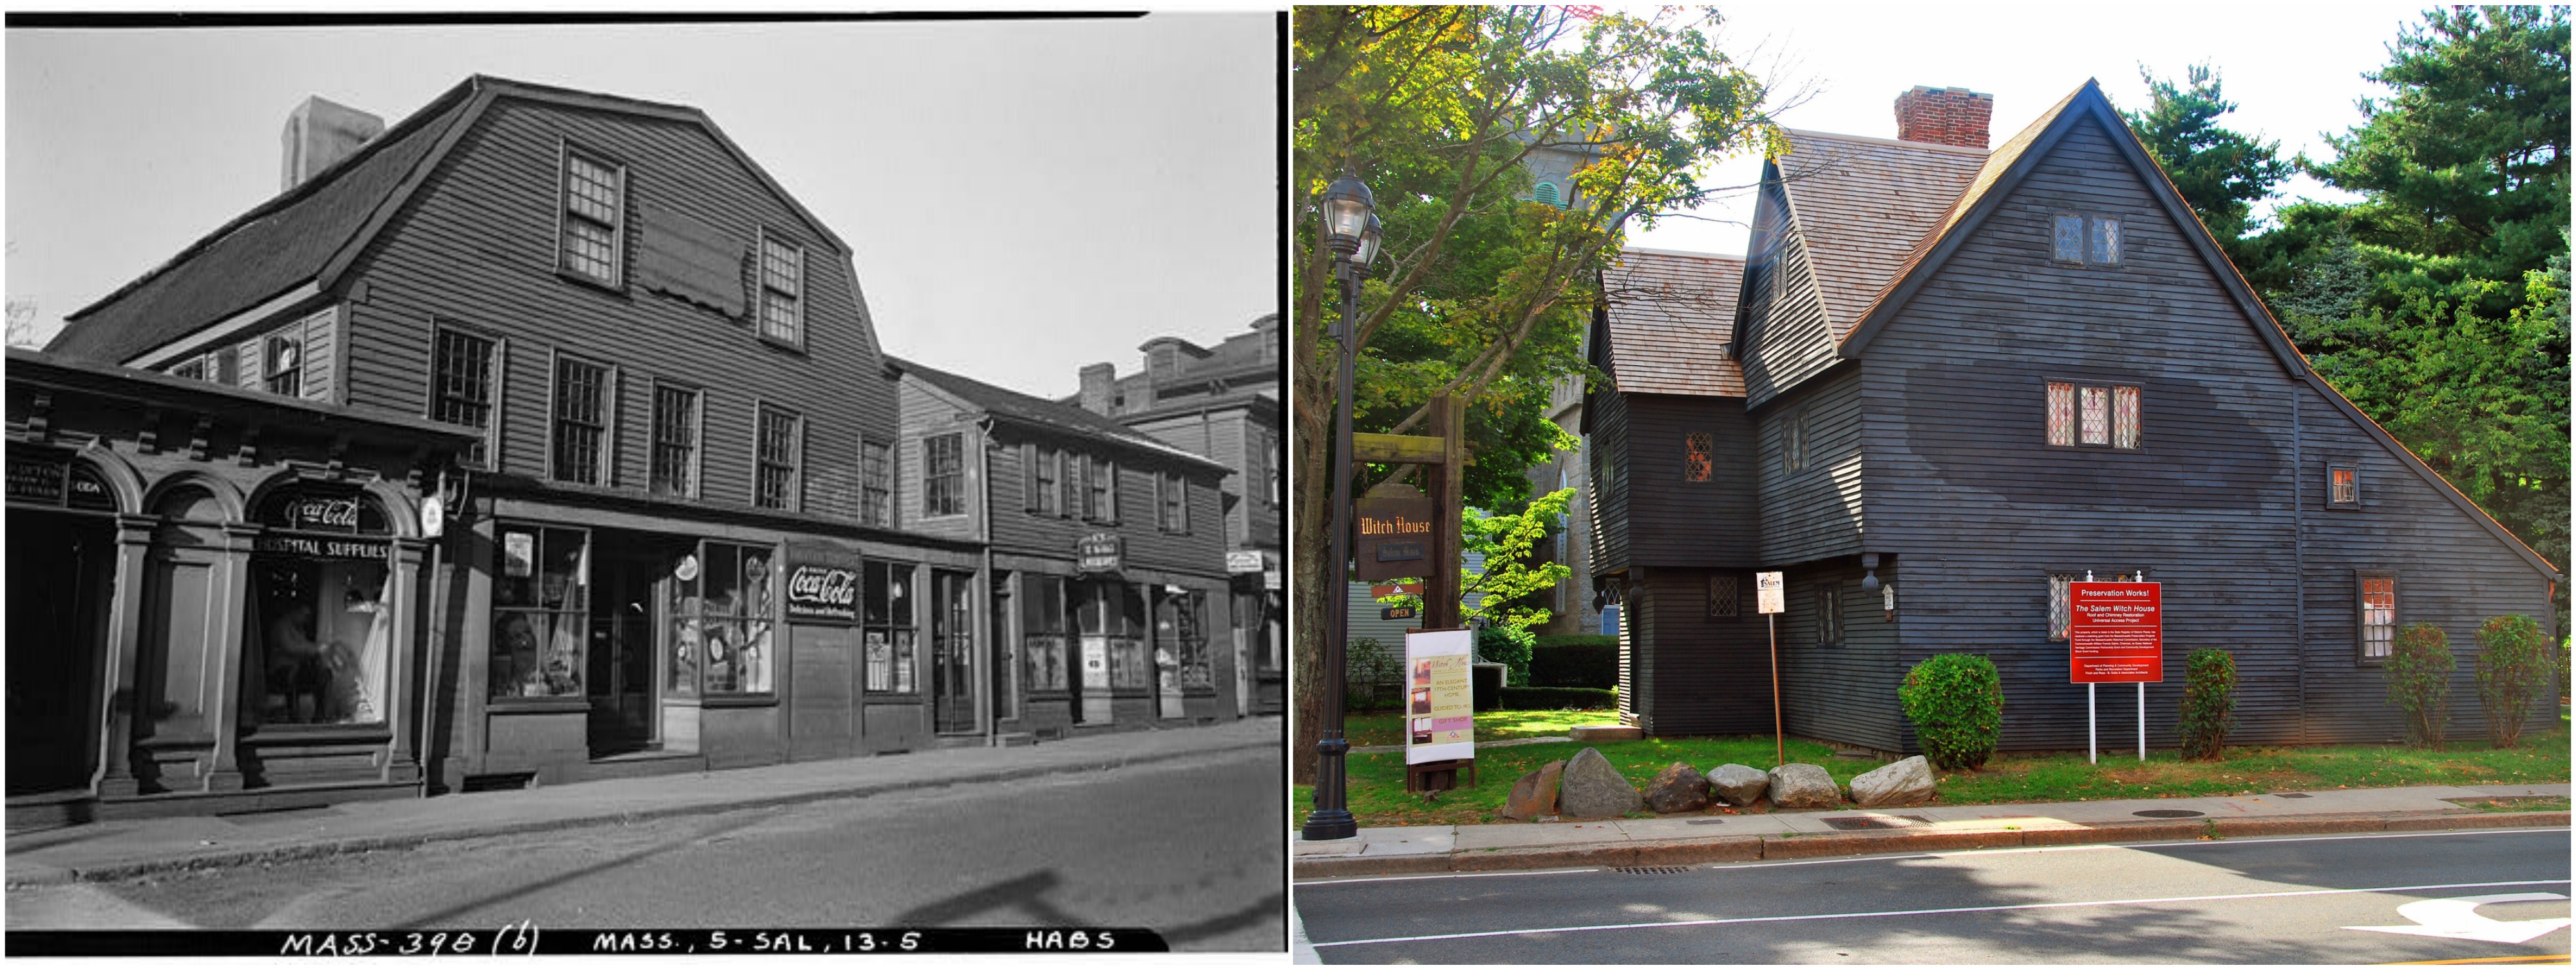 The Witch House as it stood on Essex Street at the time of the Historic American Buildings Survey (HABS) report, c. 1933; the Witch House as it now stands